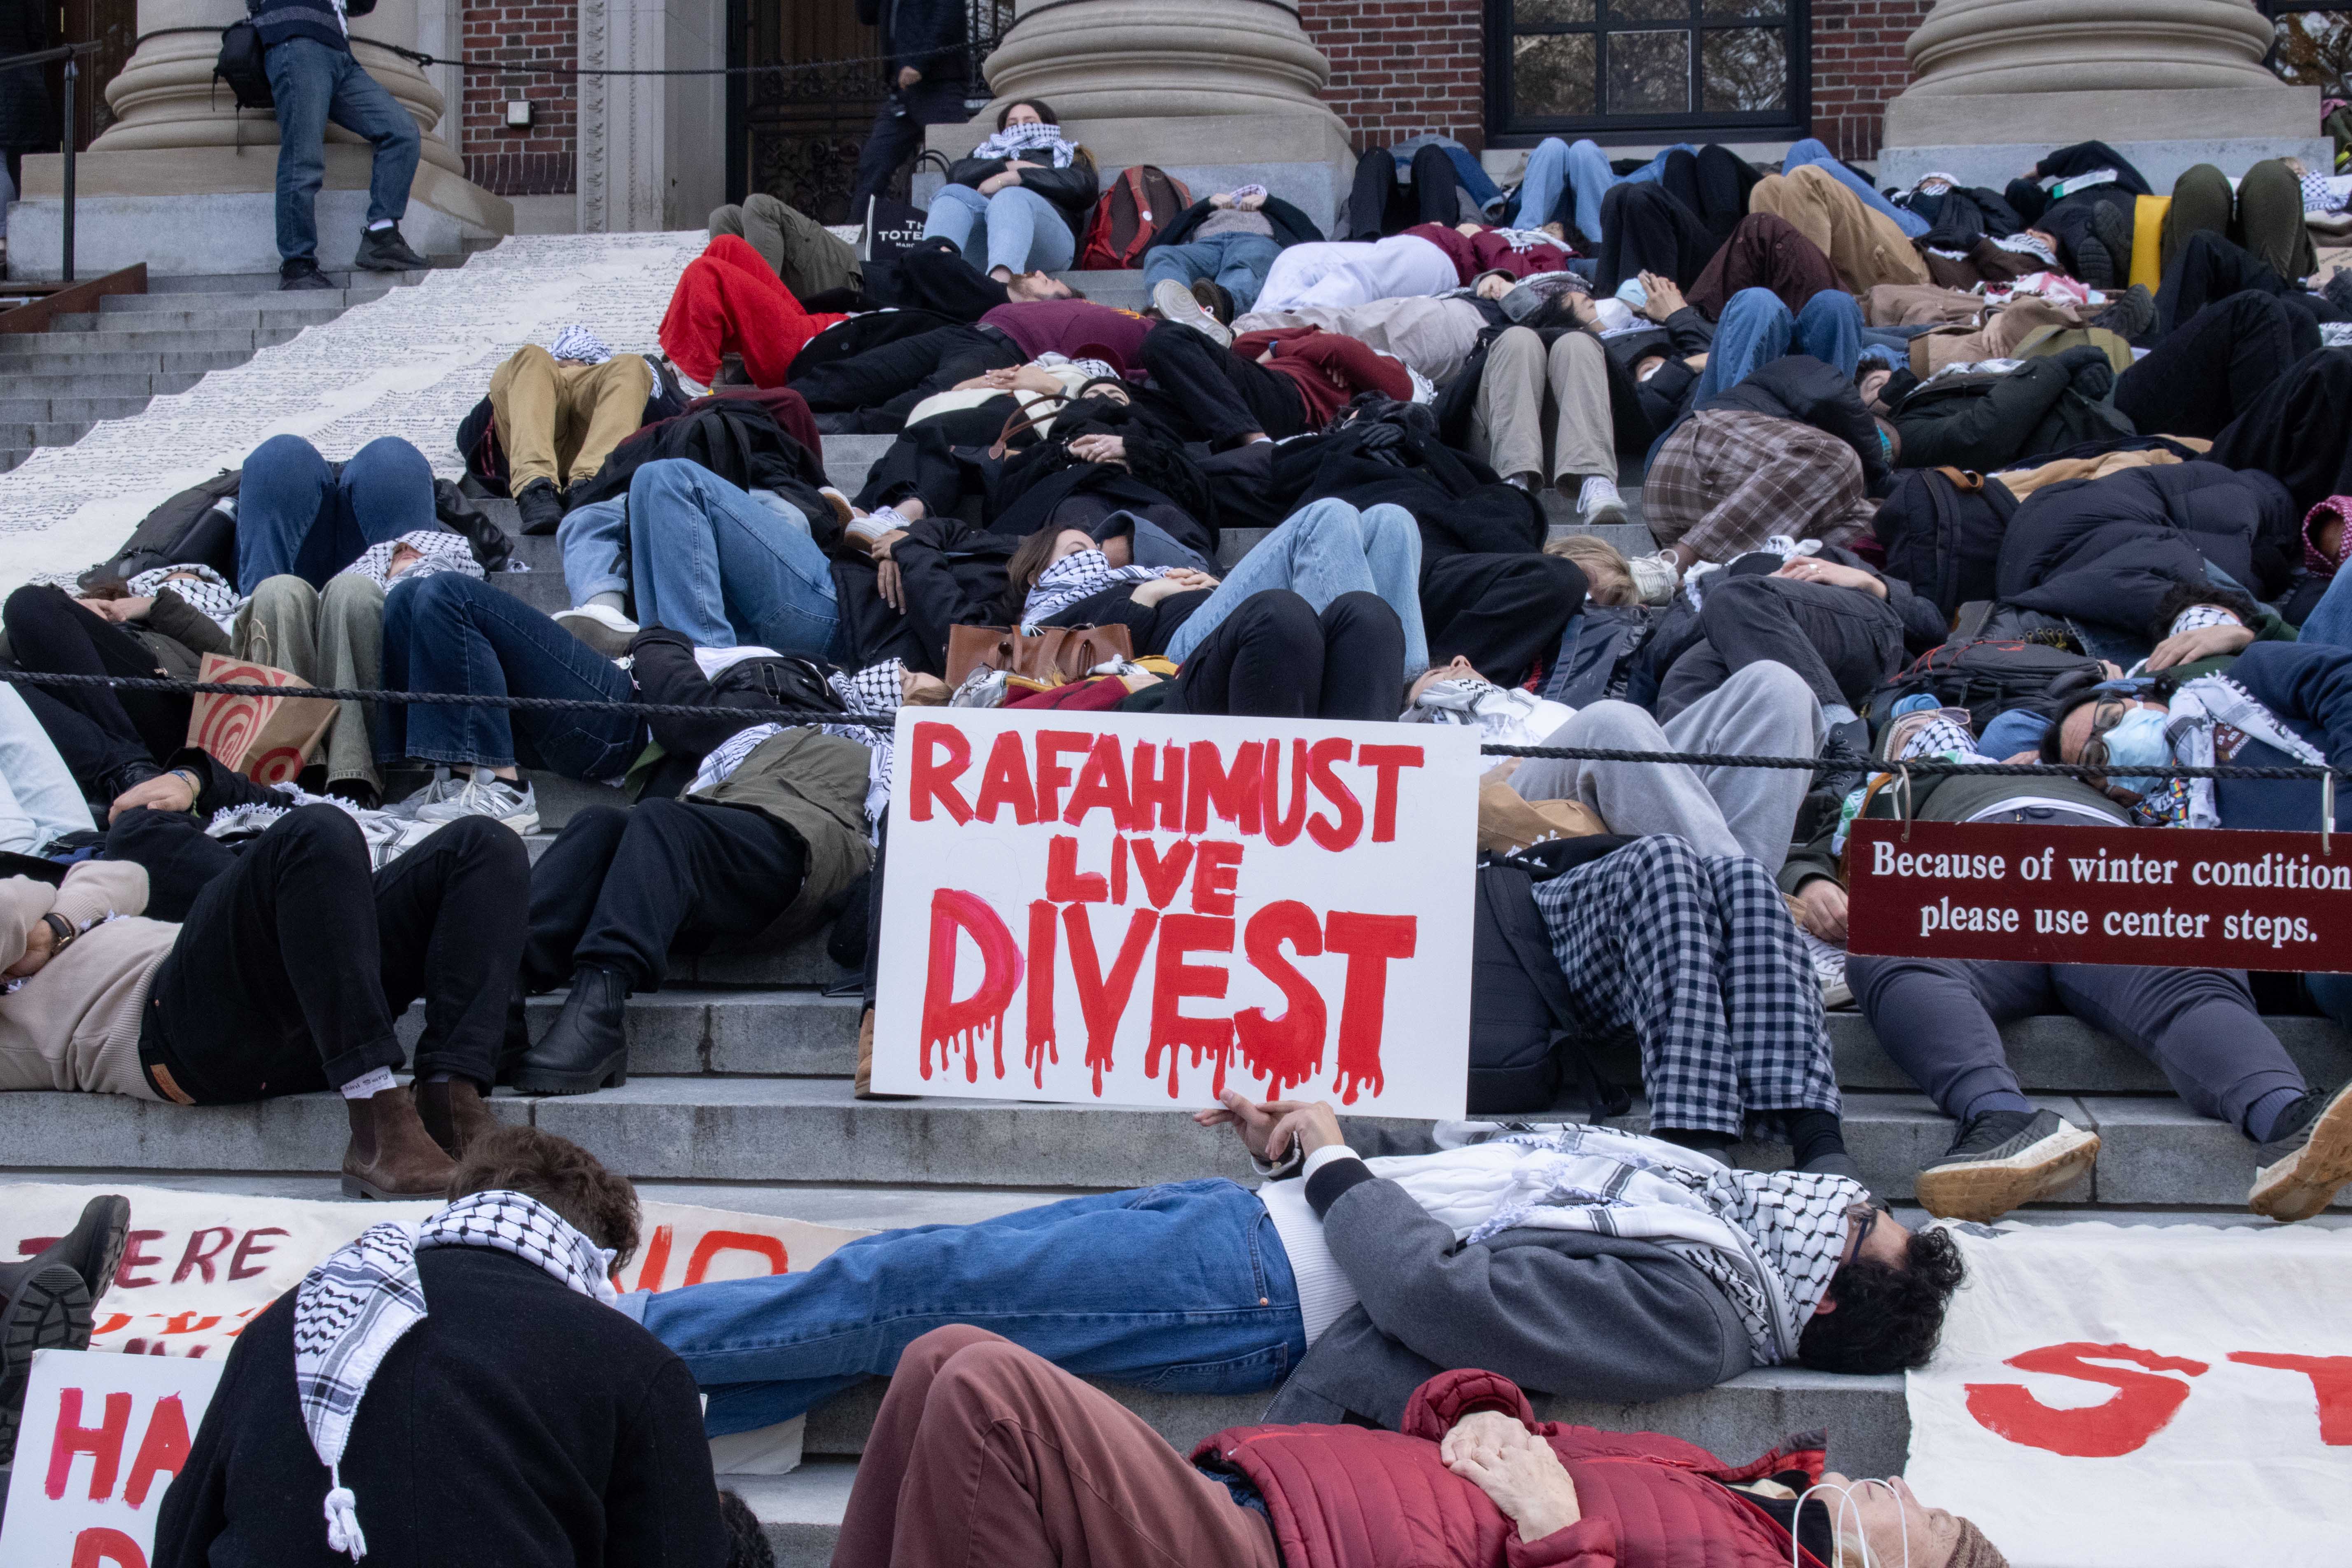 Nearly 200 students gather on the steps of Widener Library for a “die-in” demanding that Harvard disclose and divest its investments in companies with ties to Israeli settlements and the war in Gaza. After laying on the Widener steps, attendees recited Palestinian writer Refaat Alareer’s poem “If I Must Die” and played recordings of the names of individuals killed in Gaza.